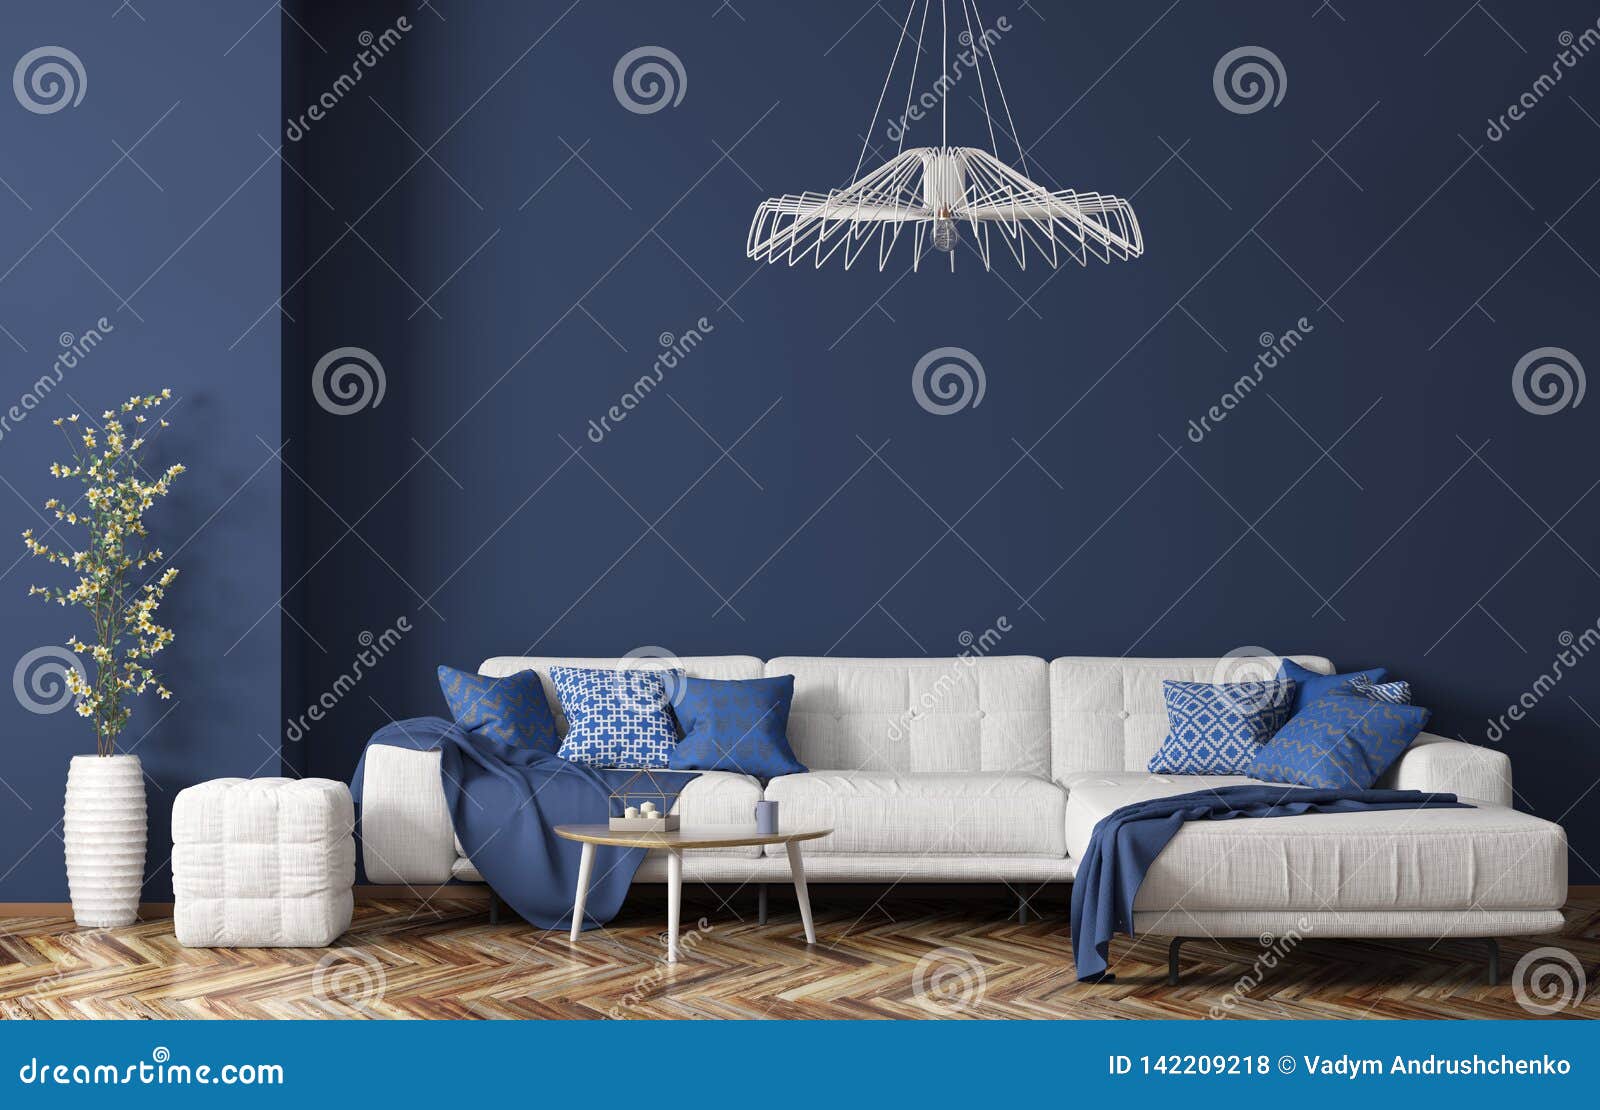 Interior Of Modern Living Room With White Fabric Sofa Over Blue Wall 3d Rendering Stock Illustration Illustration Of Lamp Furniture 142209218